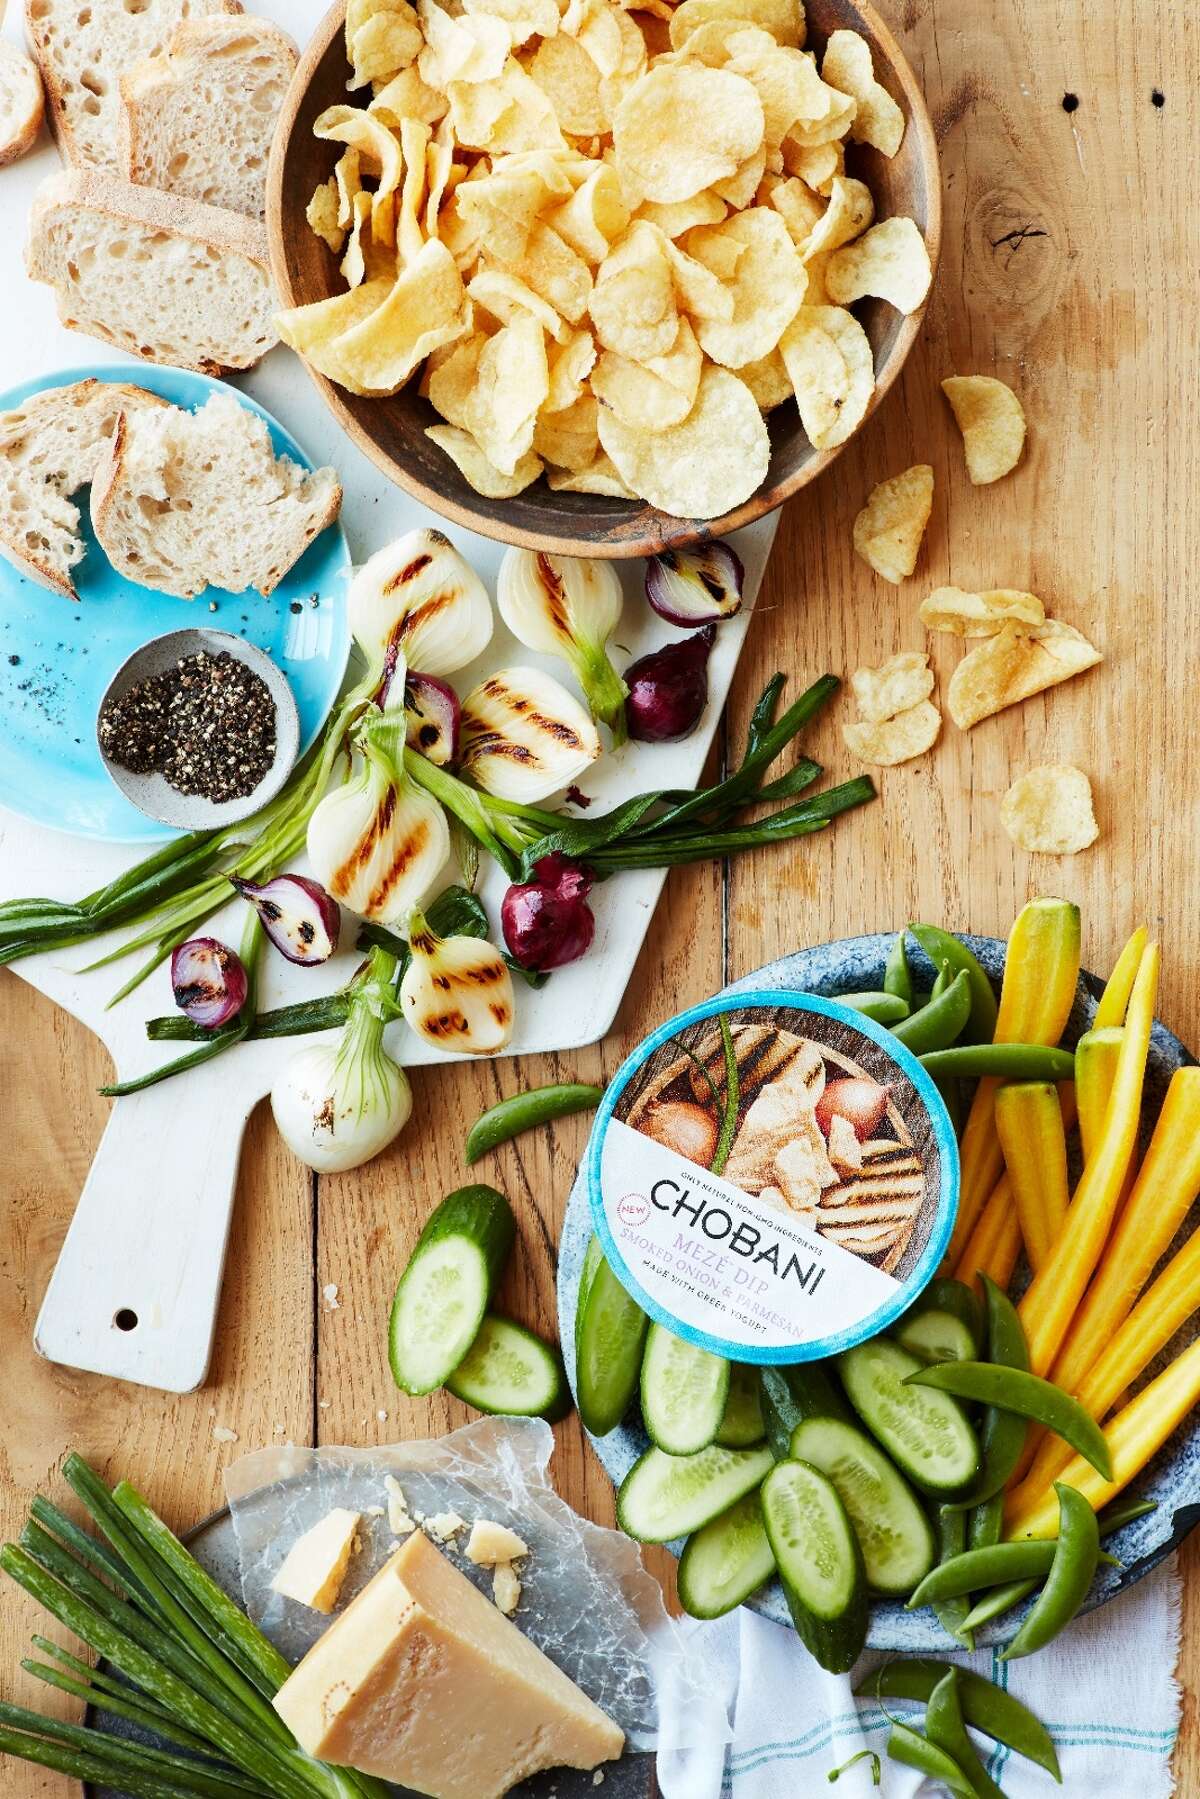 From Chobani: a new Meze Dip line that includes yogurt dips in flavors such as roasted red pepper, three-pepper salsa, chili lime, and smoked onion and parmesan.